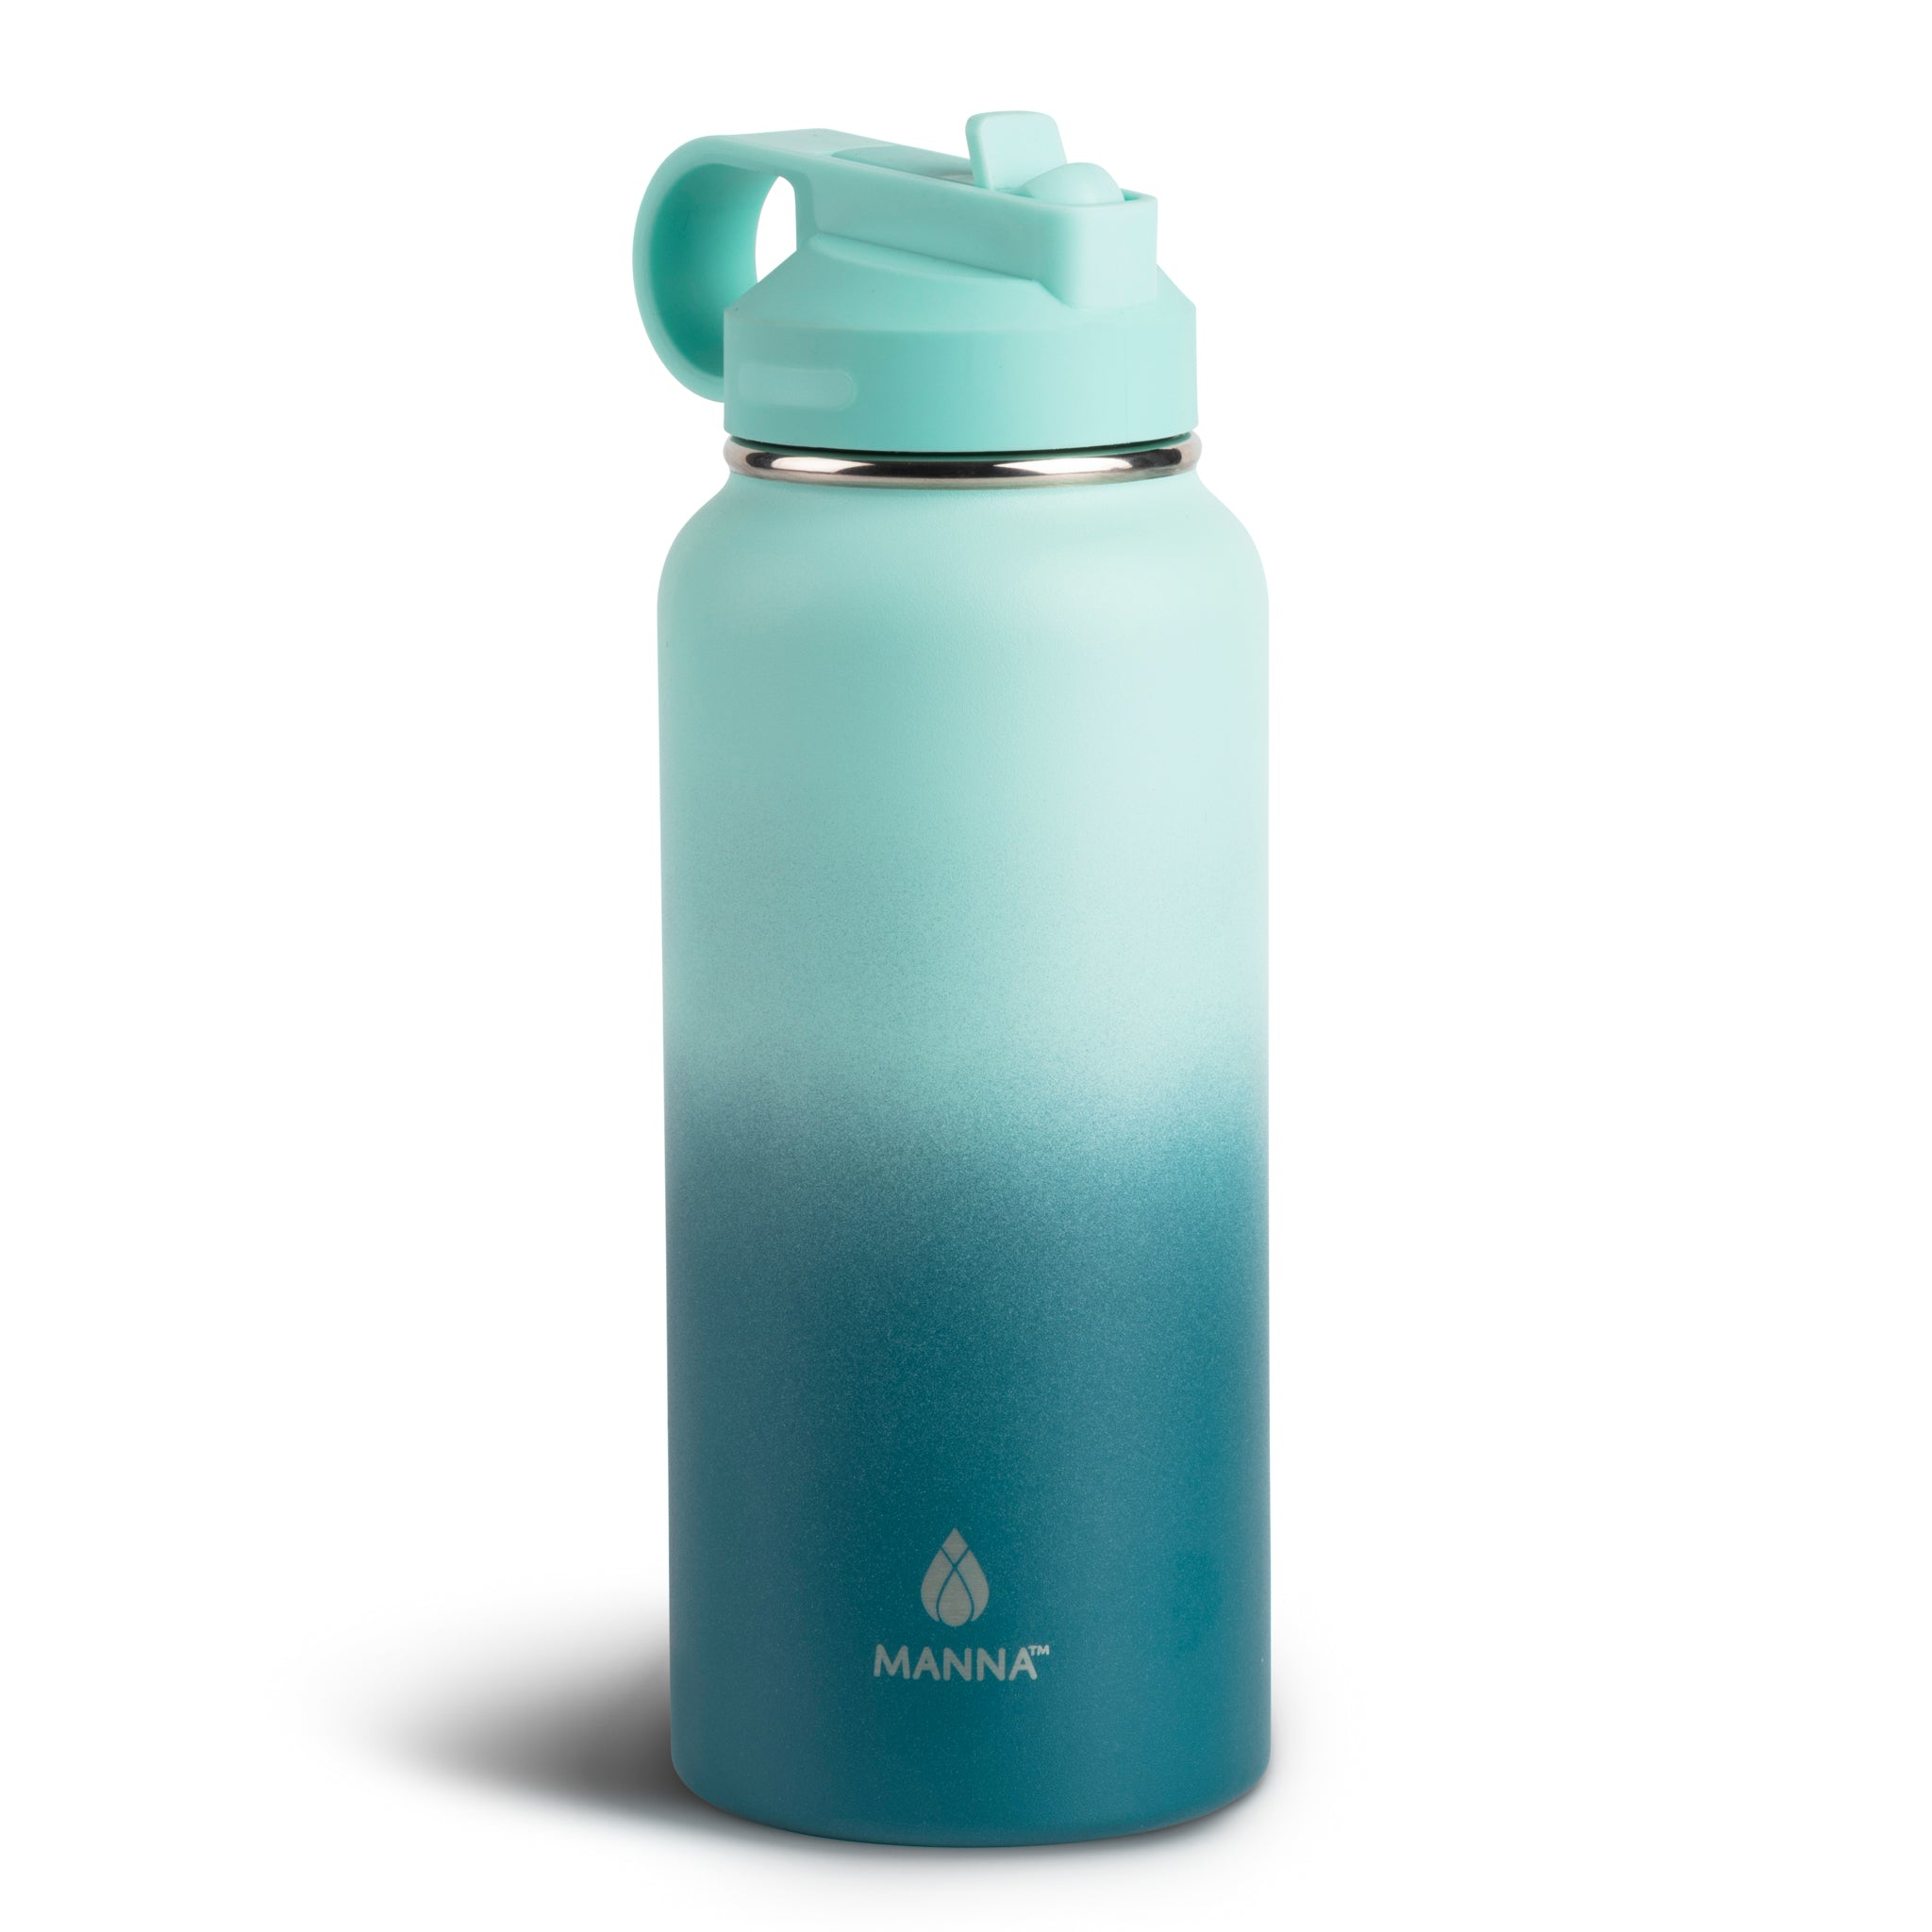 Tal Ranger 40 oz Mint Green and Black Stainless Steel Water Bottle with Wide